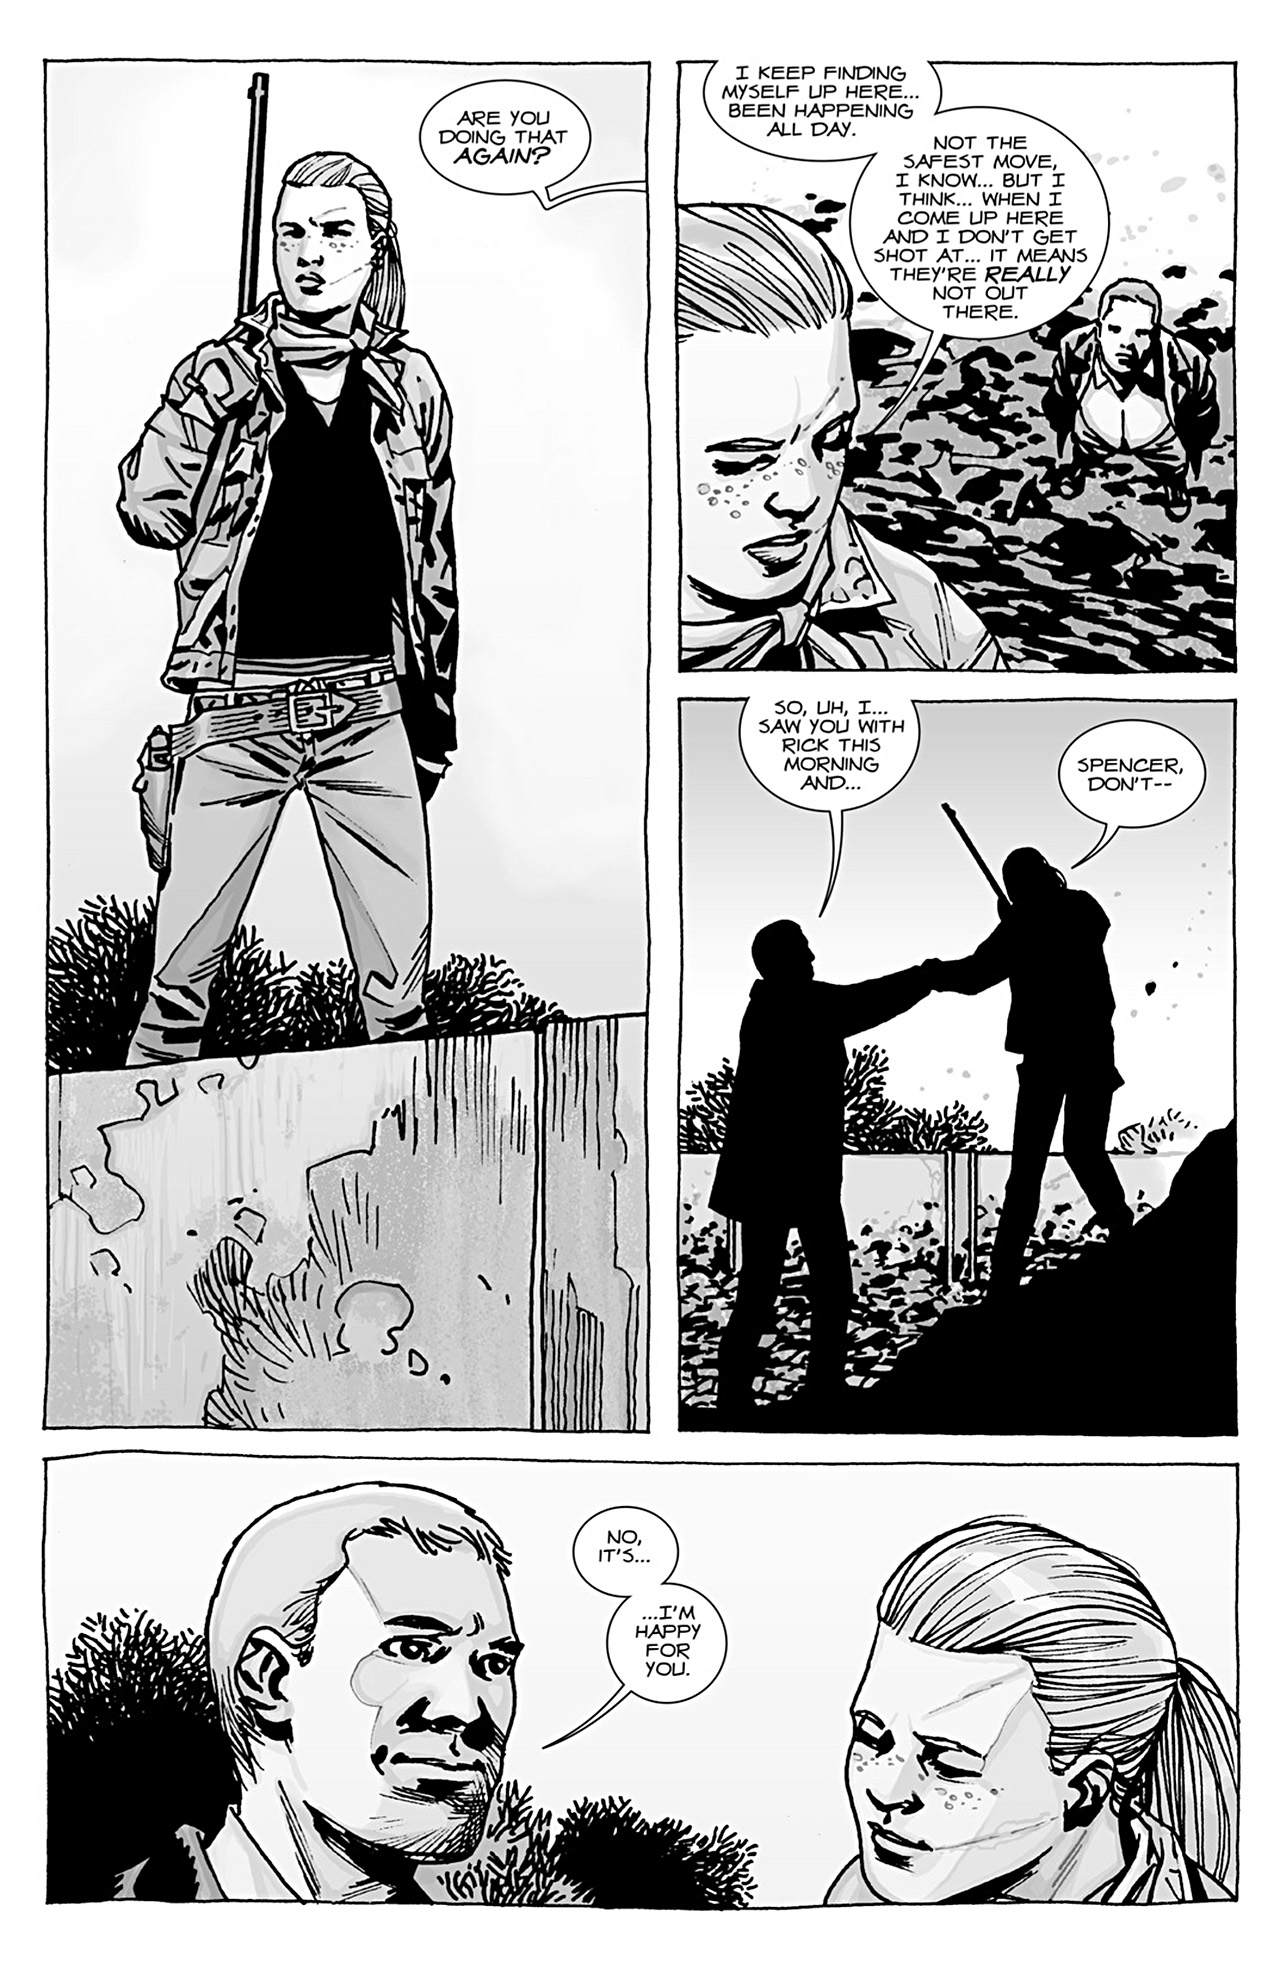 THE WALKING DEAD 100 - SOMETHING TO FEAR, Part Four